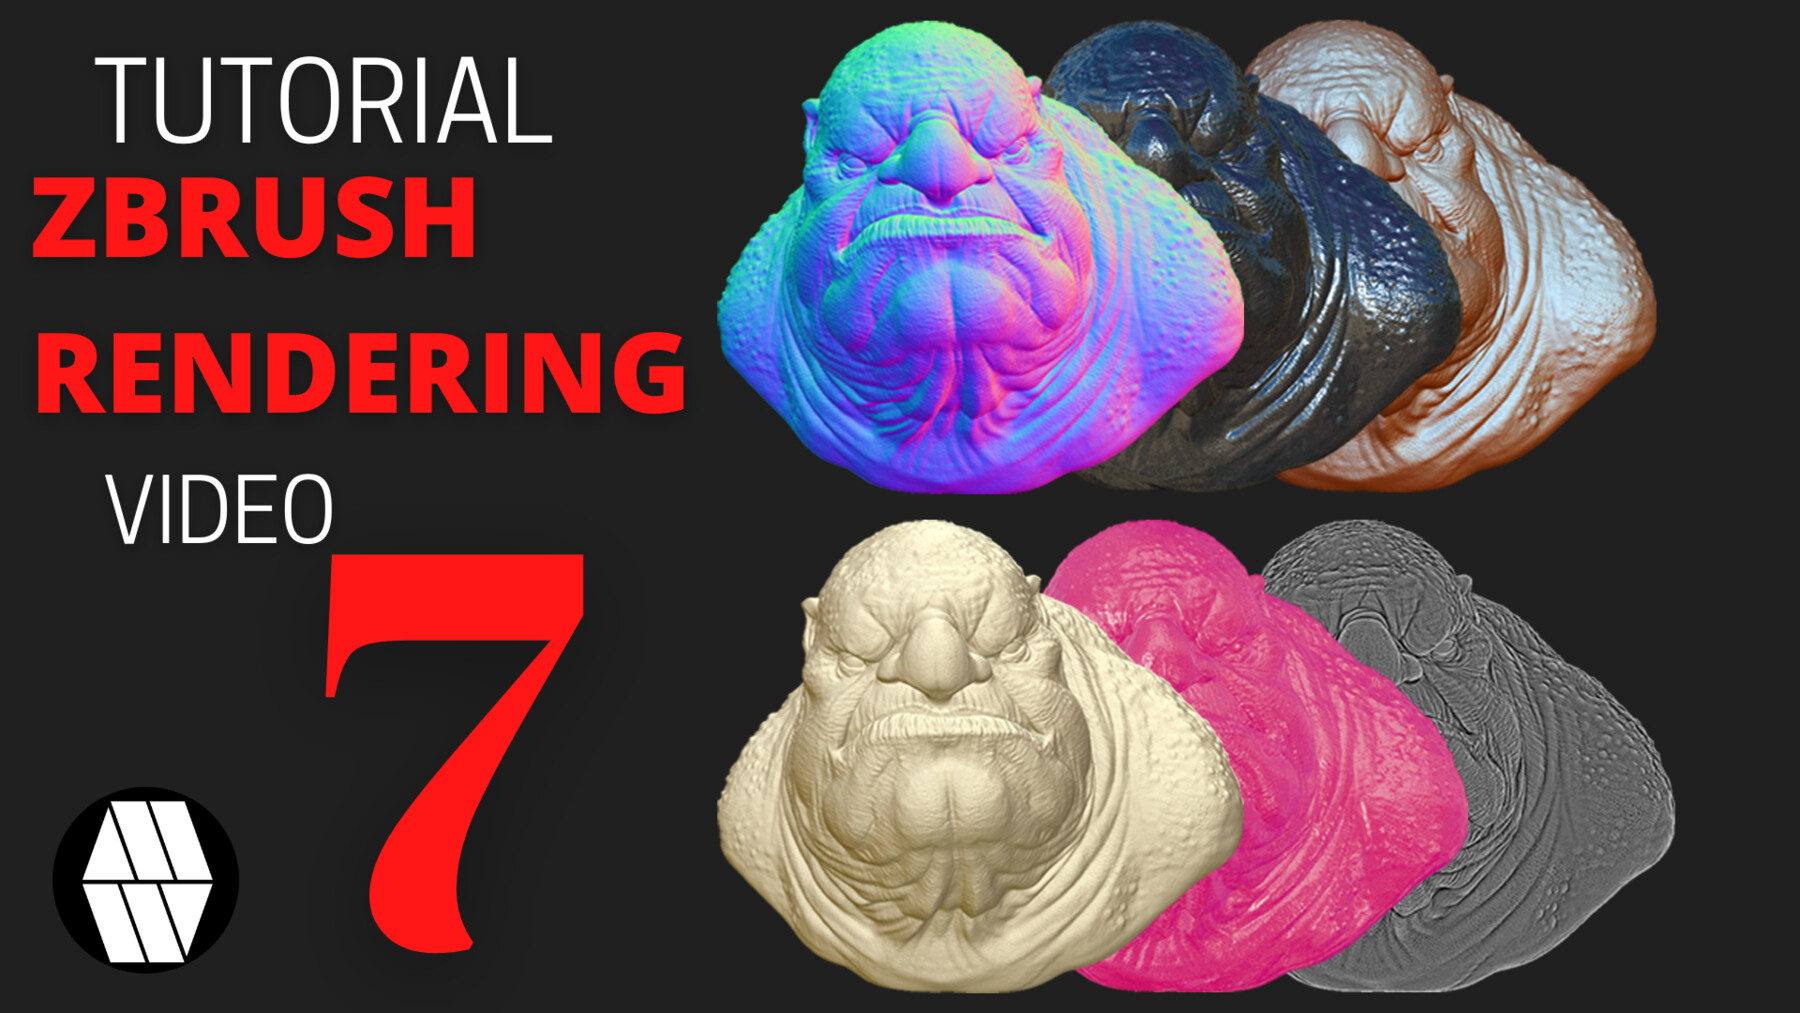 link zbrush with photoshop